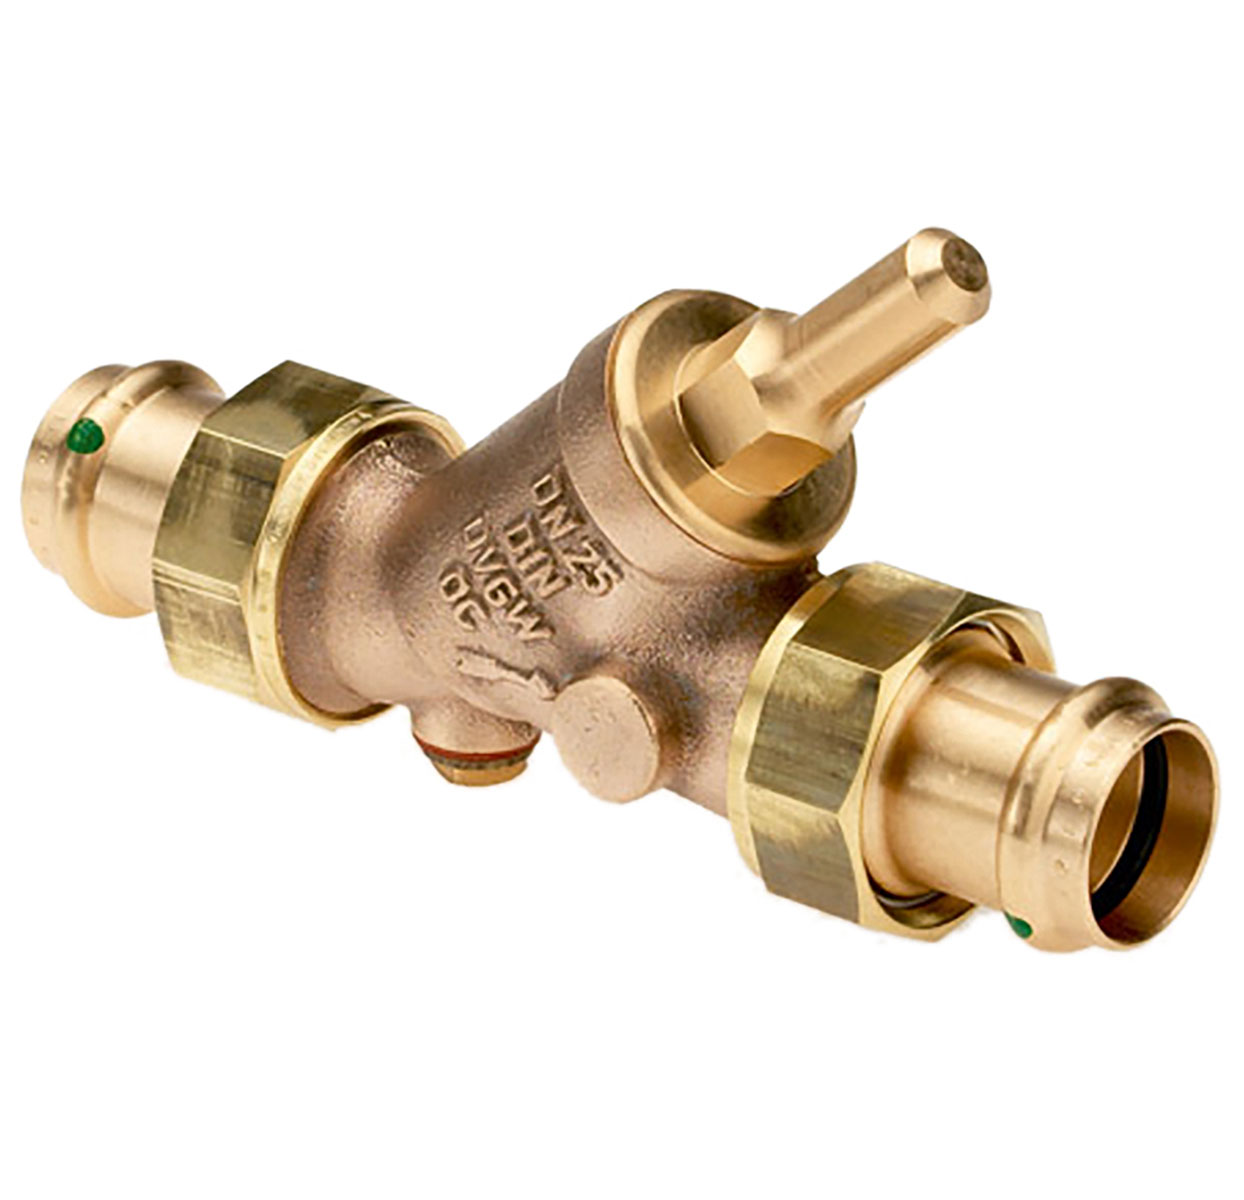 3730220 - Red-brass Backflow-preventer male thread, Viega Profipress, without drain valve